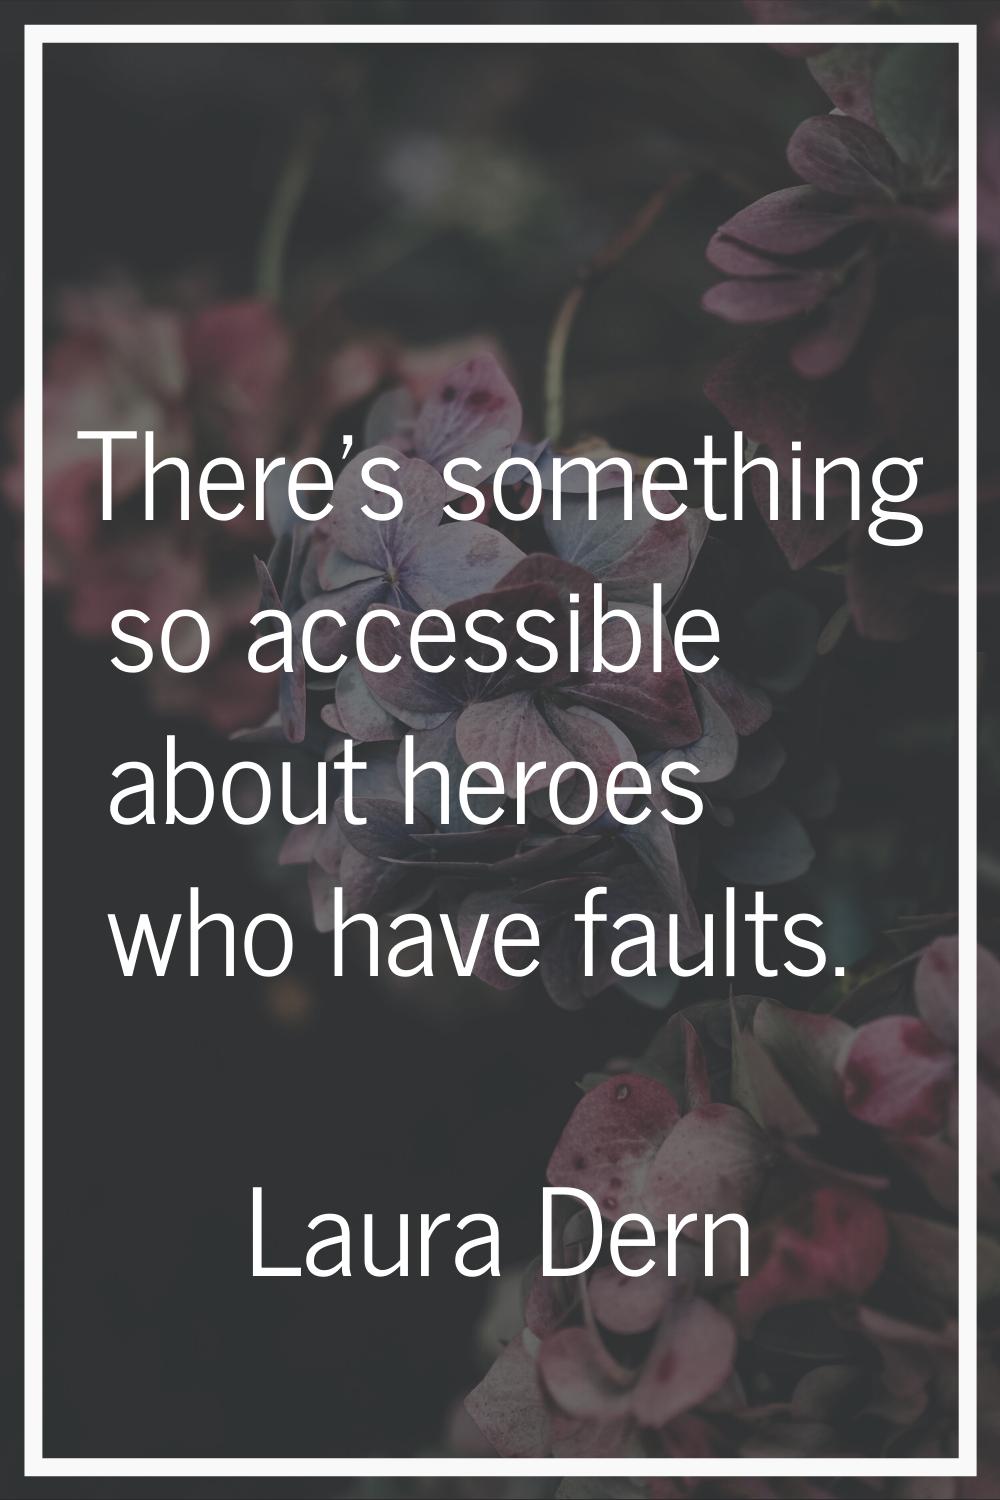 There's something so accessible about heroes who have faults.